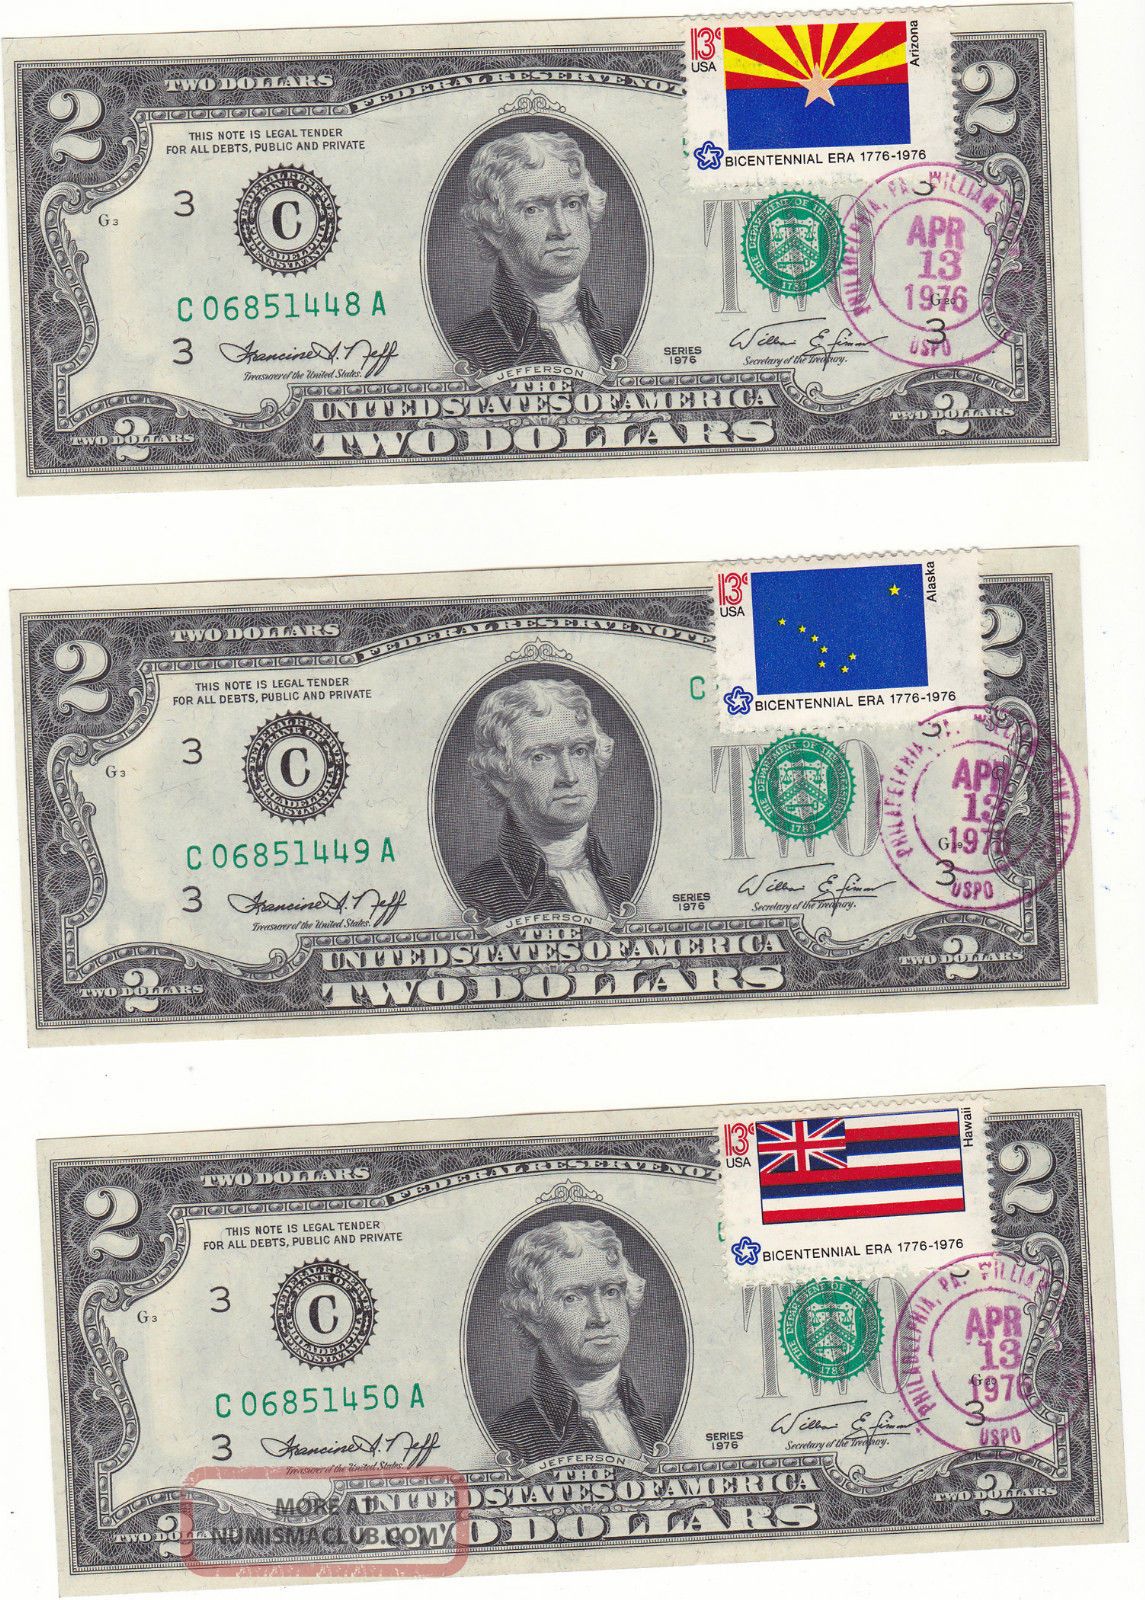 6 - 1976 $2 Two Dollar W/ First Day Issue & Postmarked April 13,  1976 Rare Small Size Notes photo